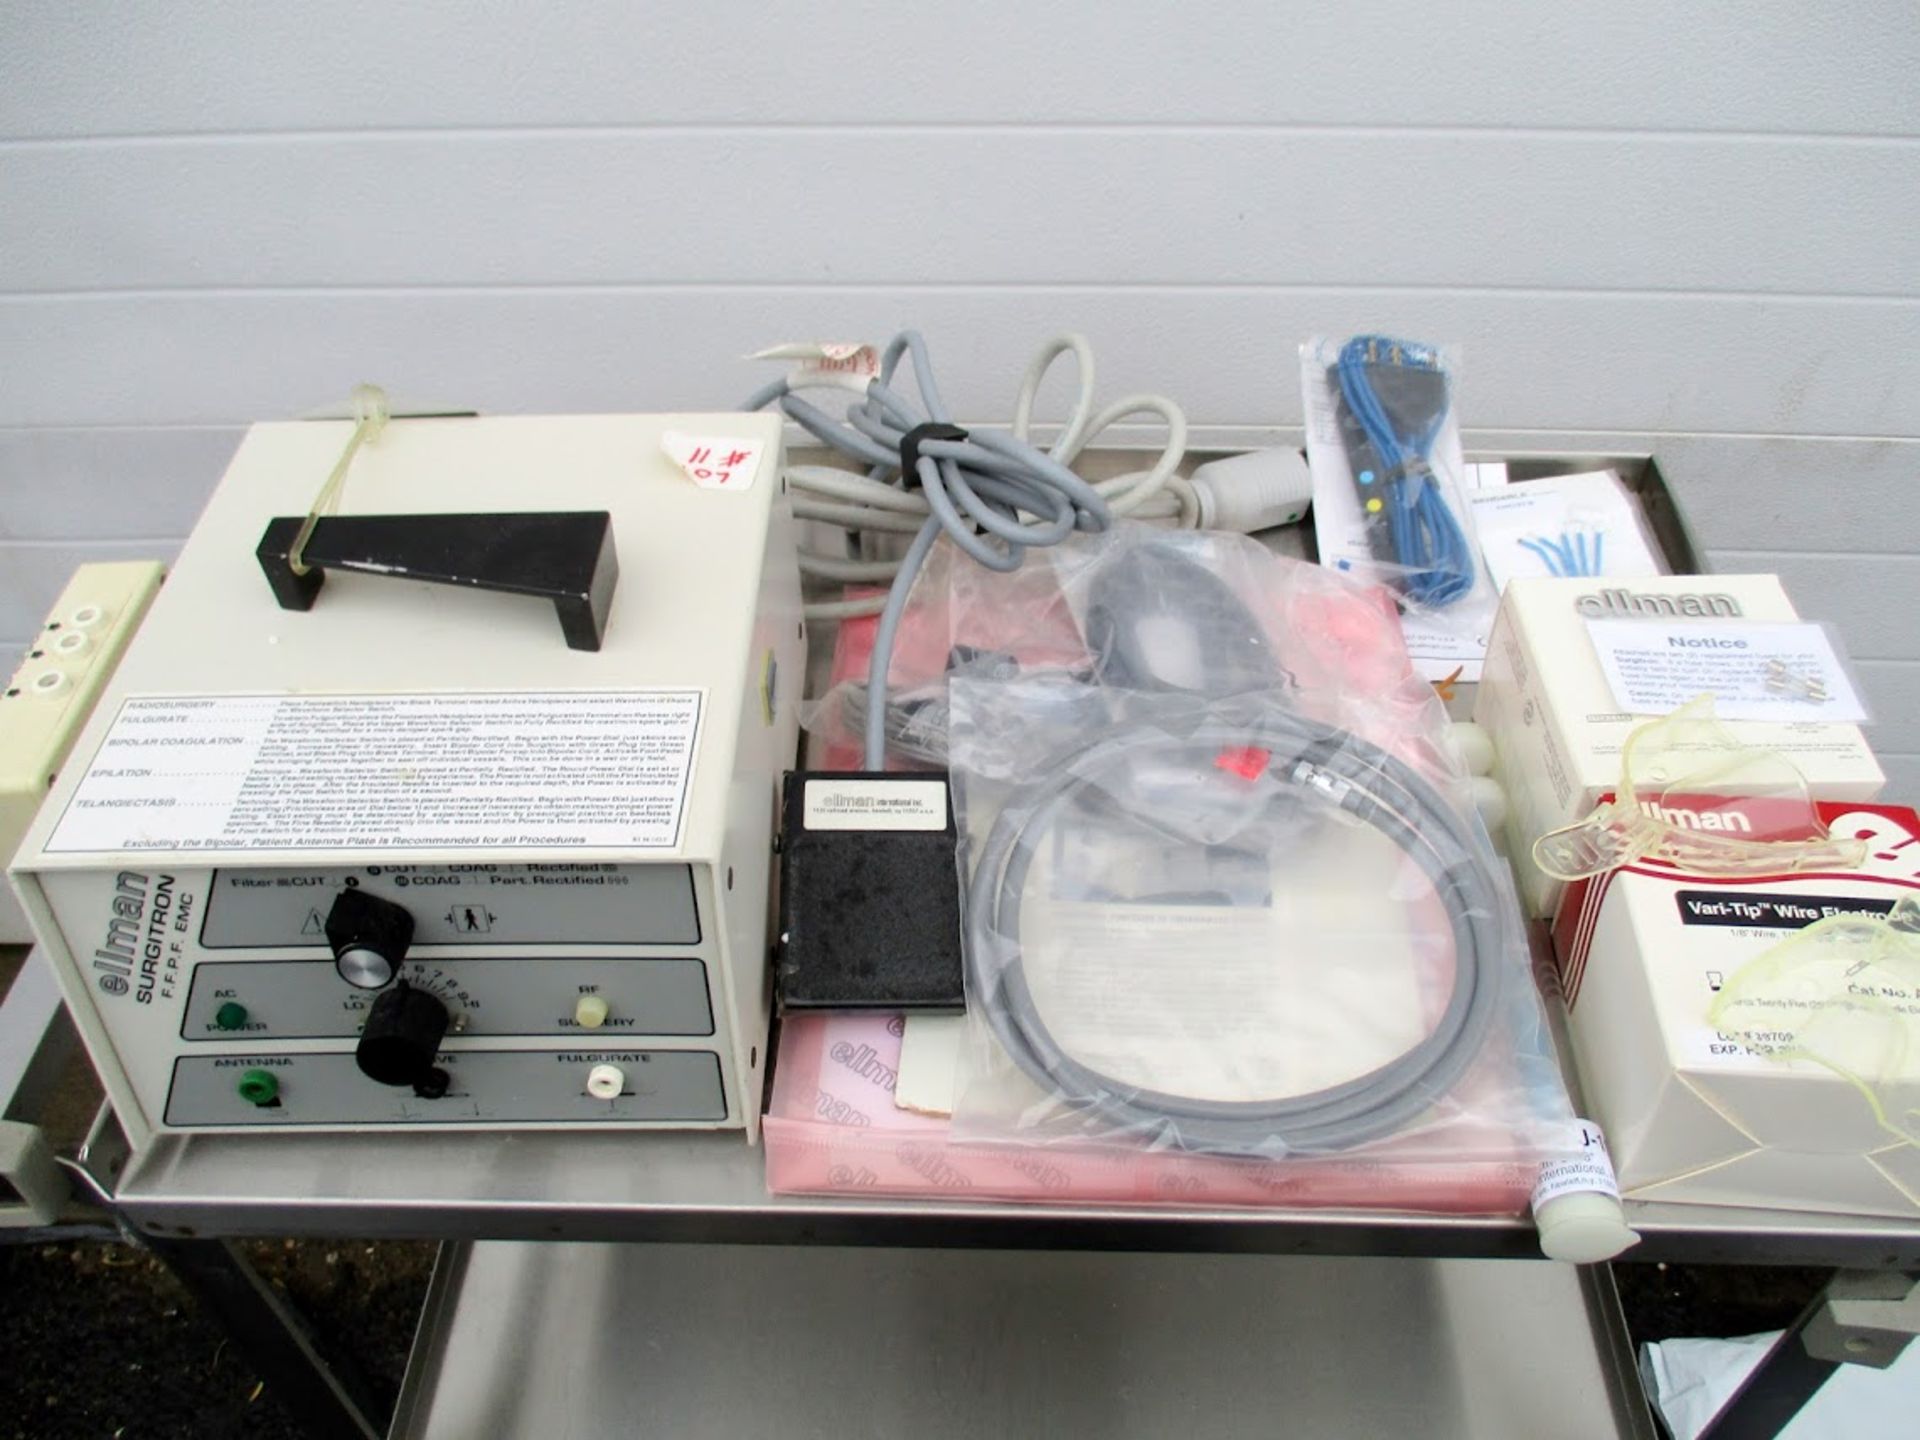 Ellman Surgitron EMC FFPF Electrosurgery Unit for Opthalmology. Comes with round loop electrodes,